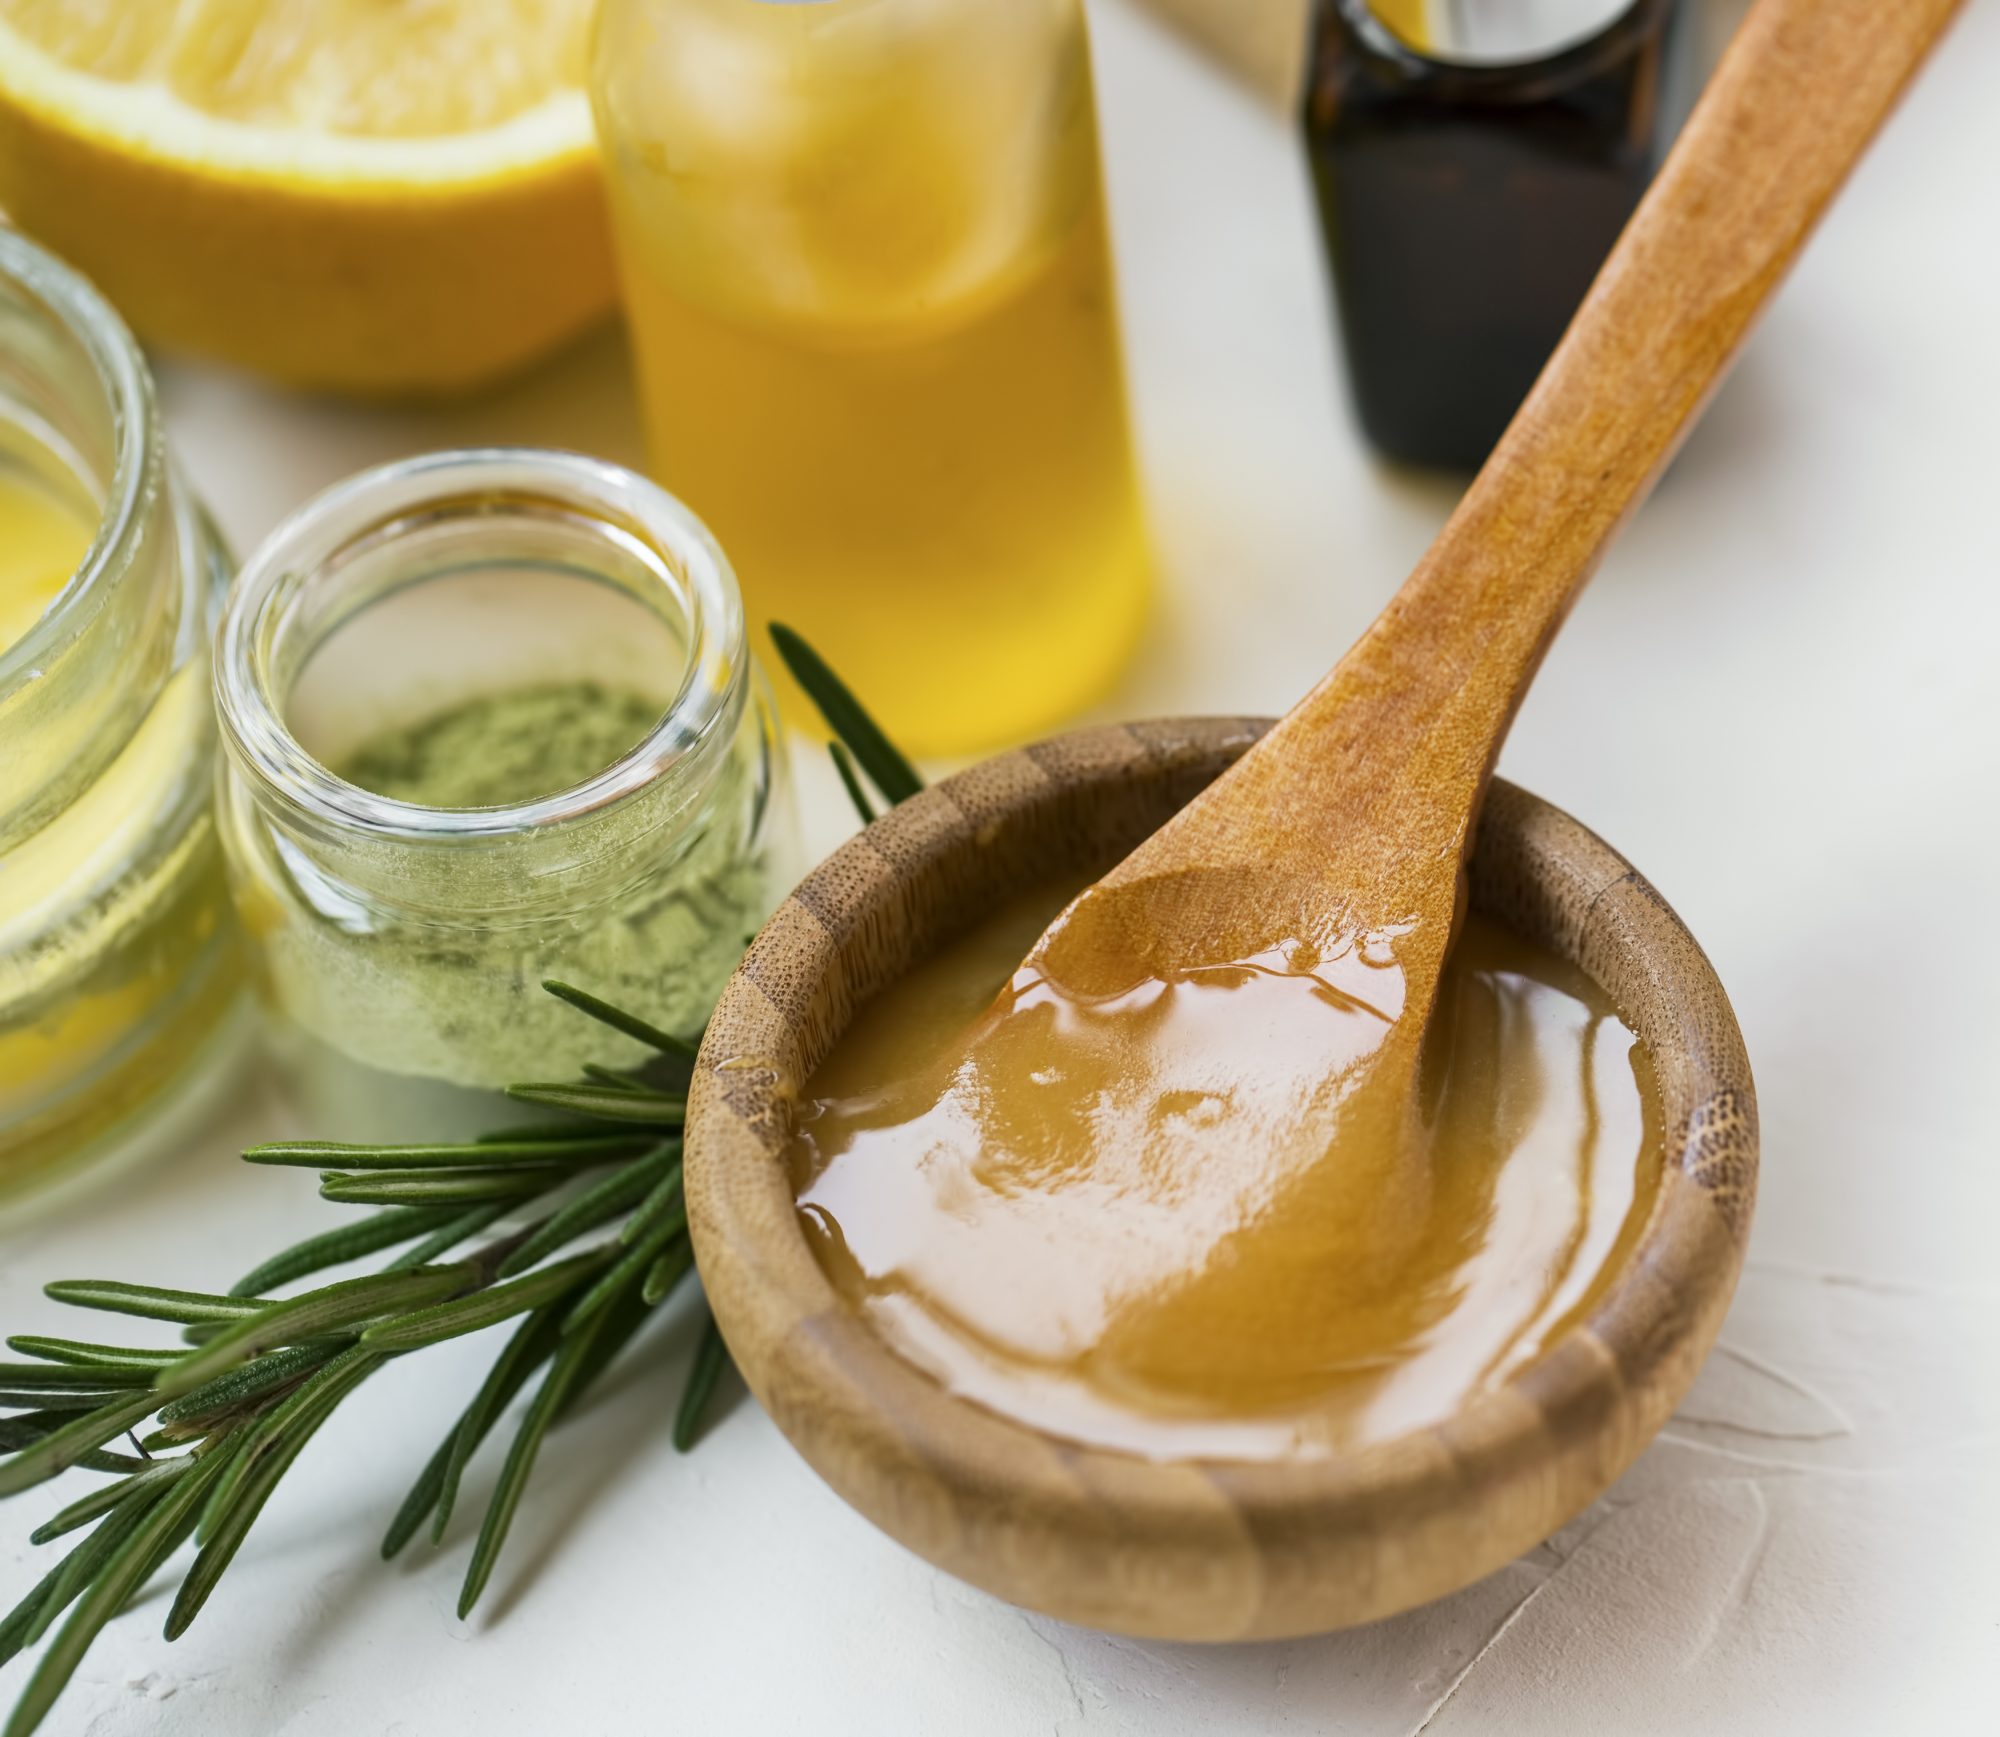 Could manuka honey be effective on collagen scaffolds?